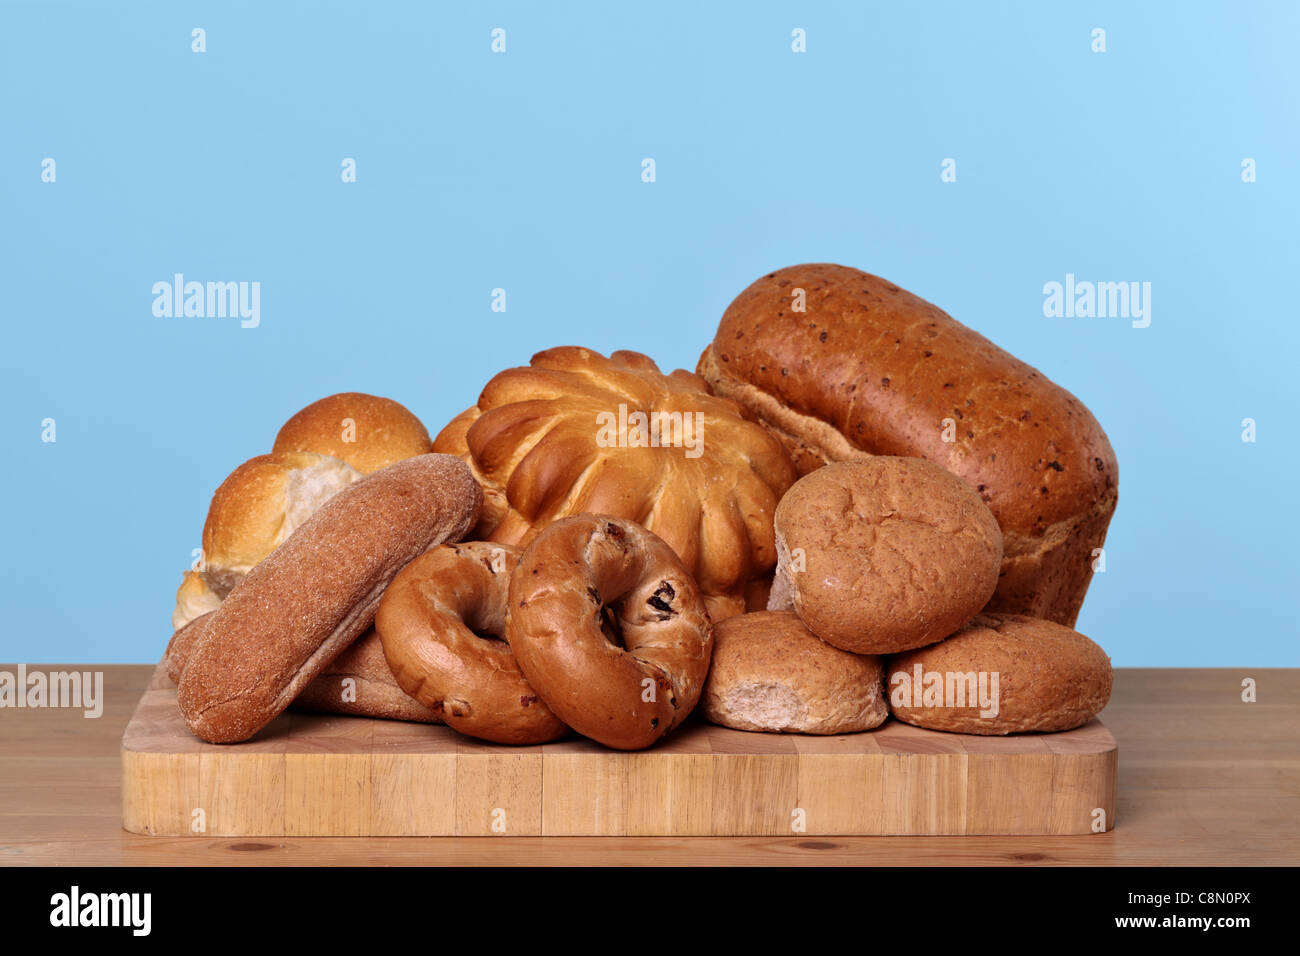 Photo of various types of bread loaves and rolls on a wooden board. Stock Photo